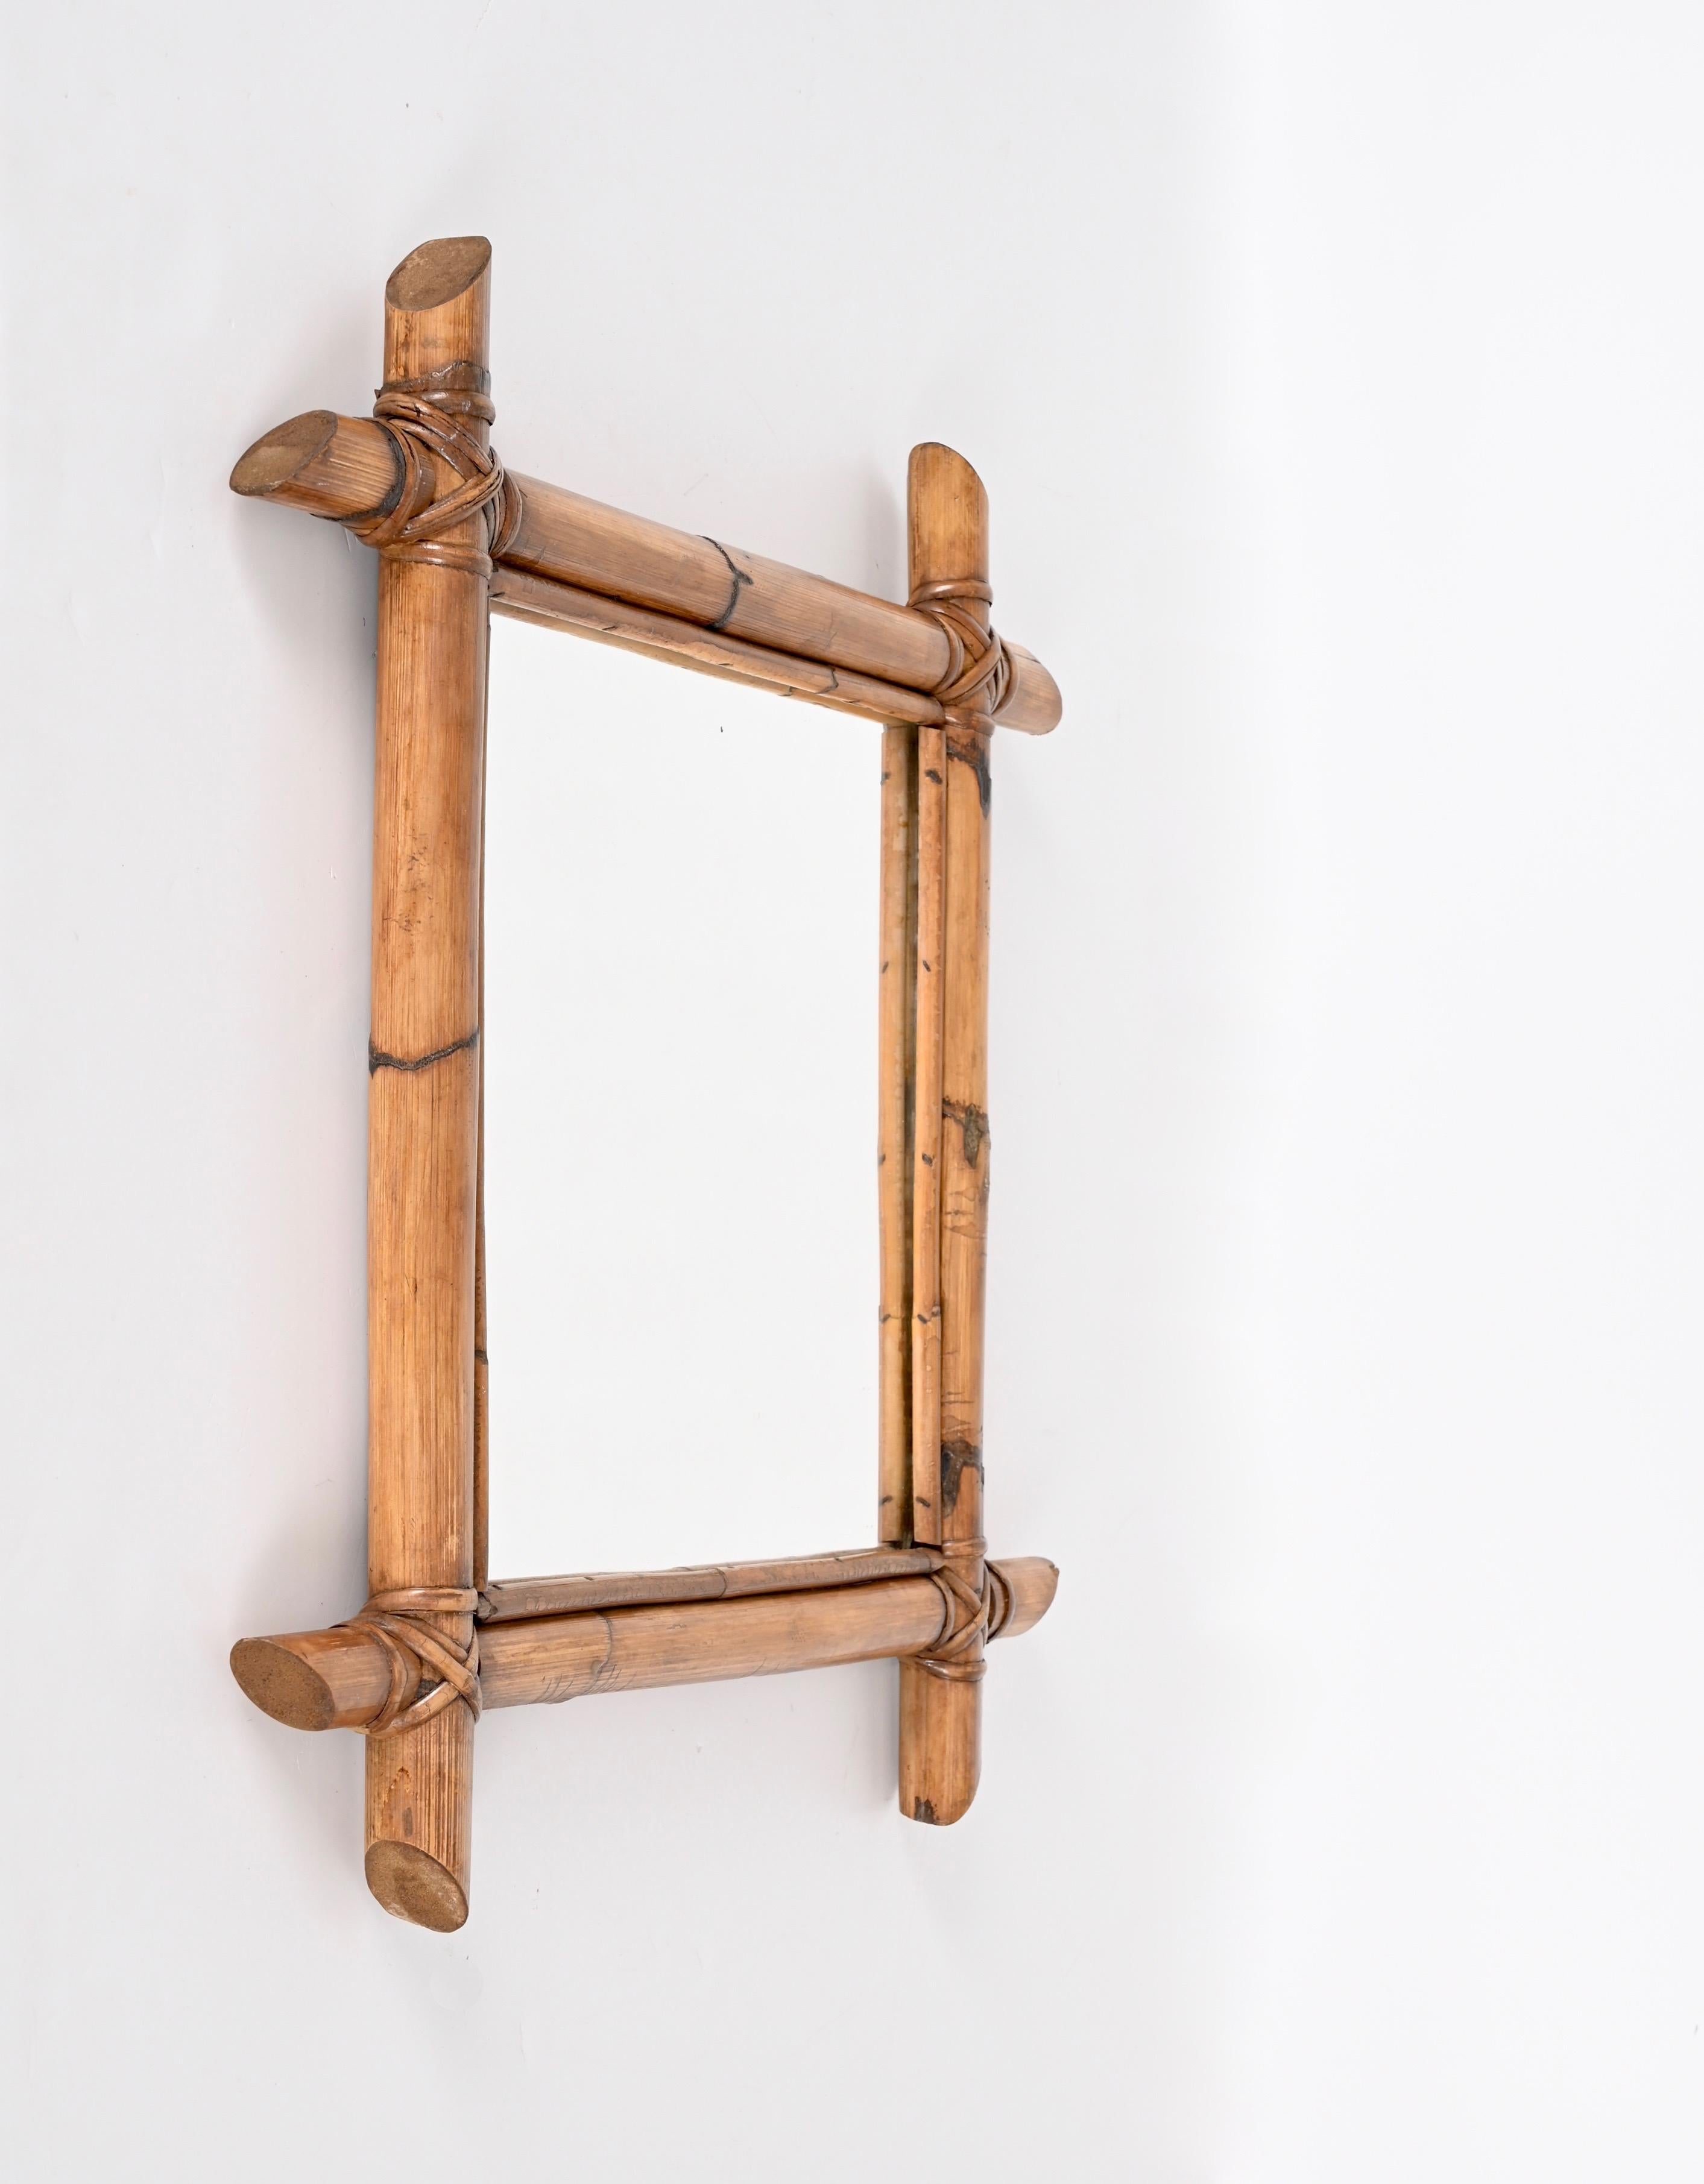 Midcentury Square Italian Mirror with Bamboo Woven Wicker Frame, 1950s For Sale 3